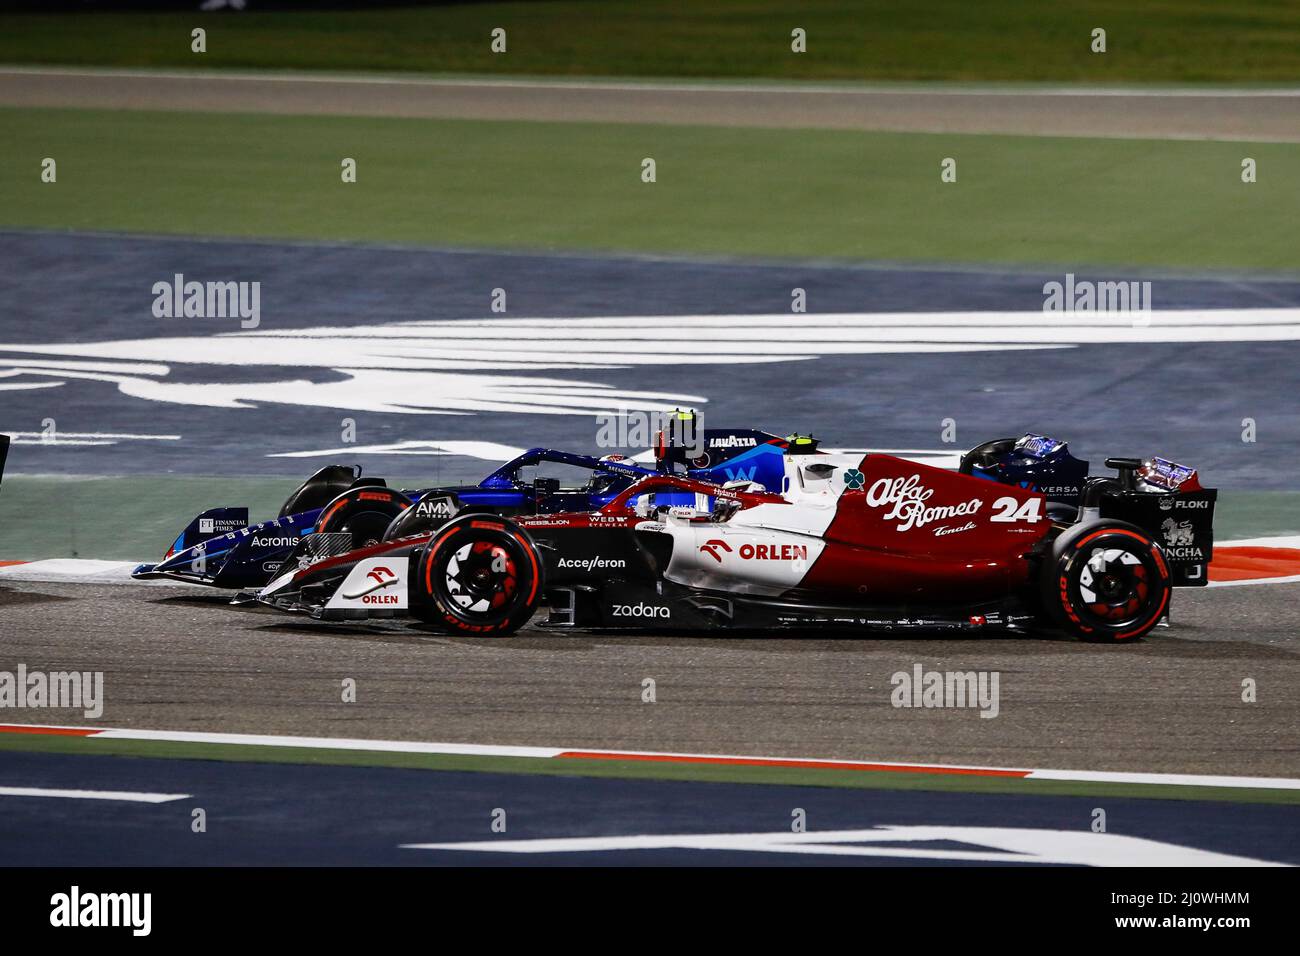 (220321) -- SAKHIR, March 21, 2022 (Xinhua) -- Alfa Romeo's Chinese driver Zhou Guanyu competes during the Bahrain Formula One Grand Prix at the Bahrain International Circuit in the city of Sakhir on March 20, 2022. (DPPI/Handout via Xinhua) Stock Photo